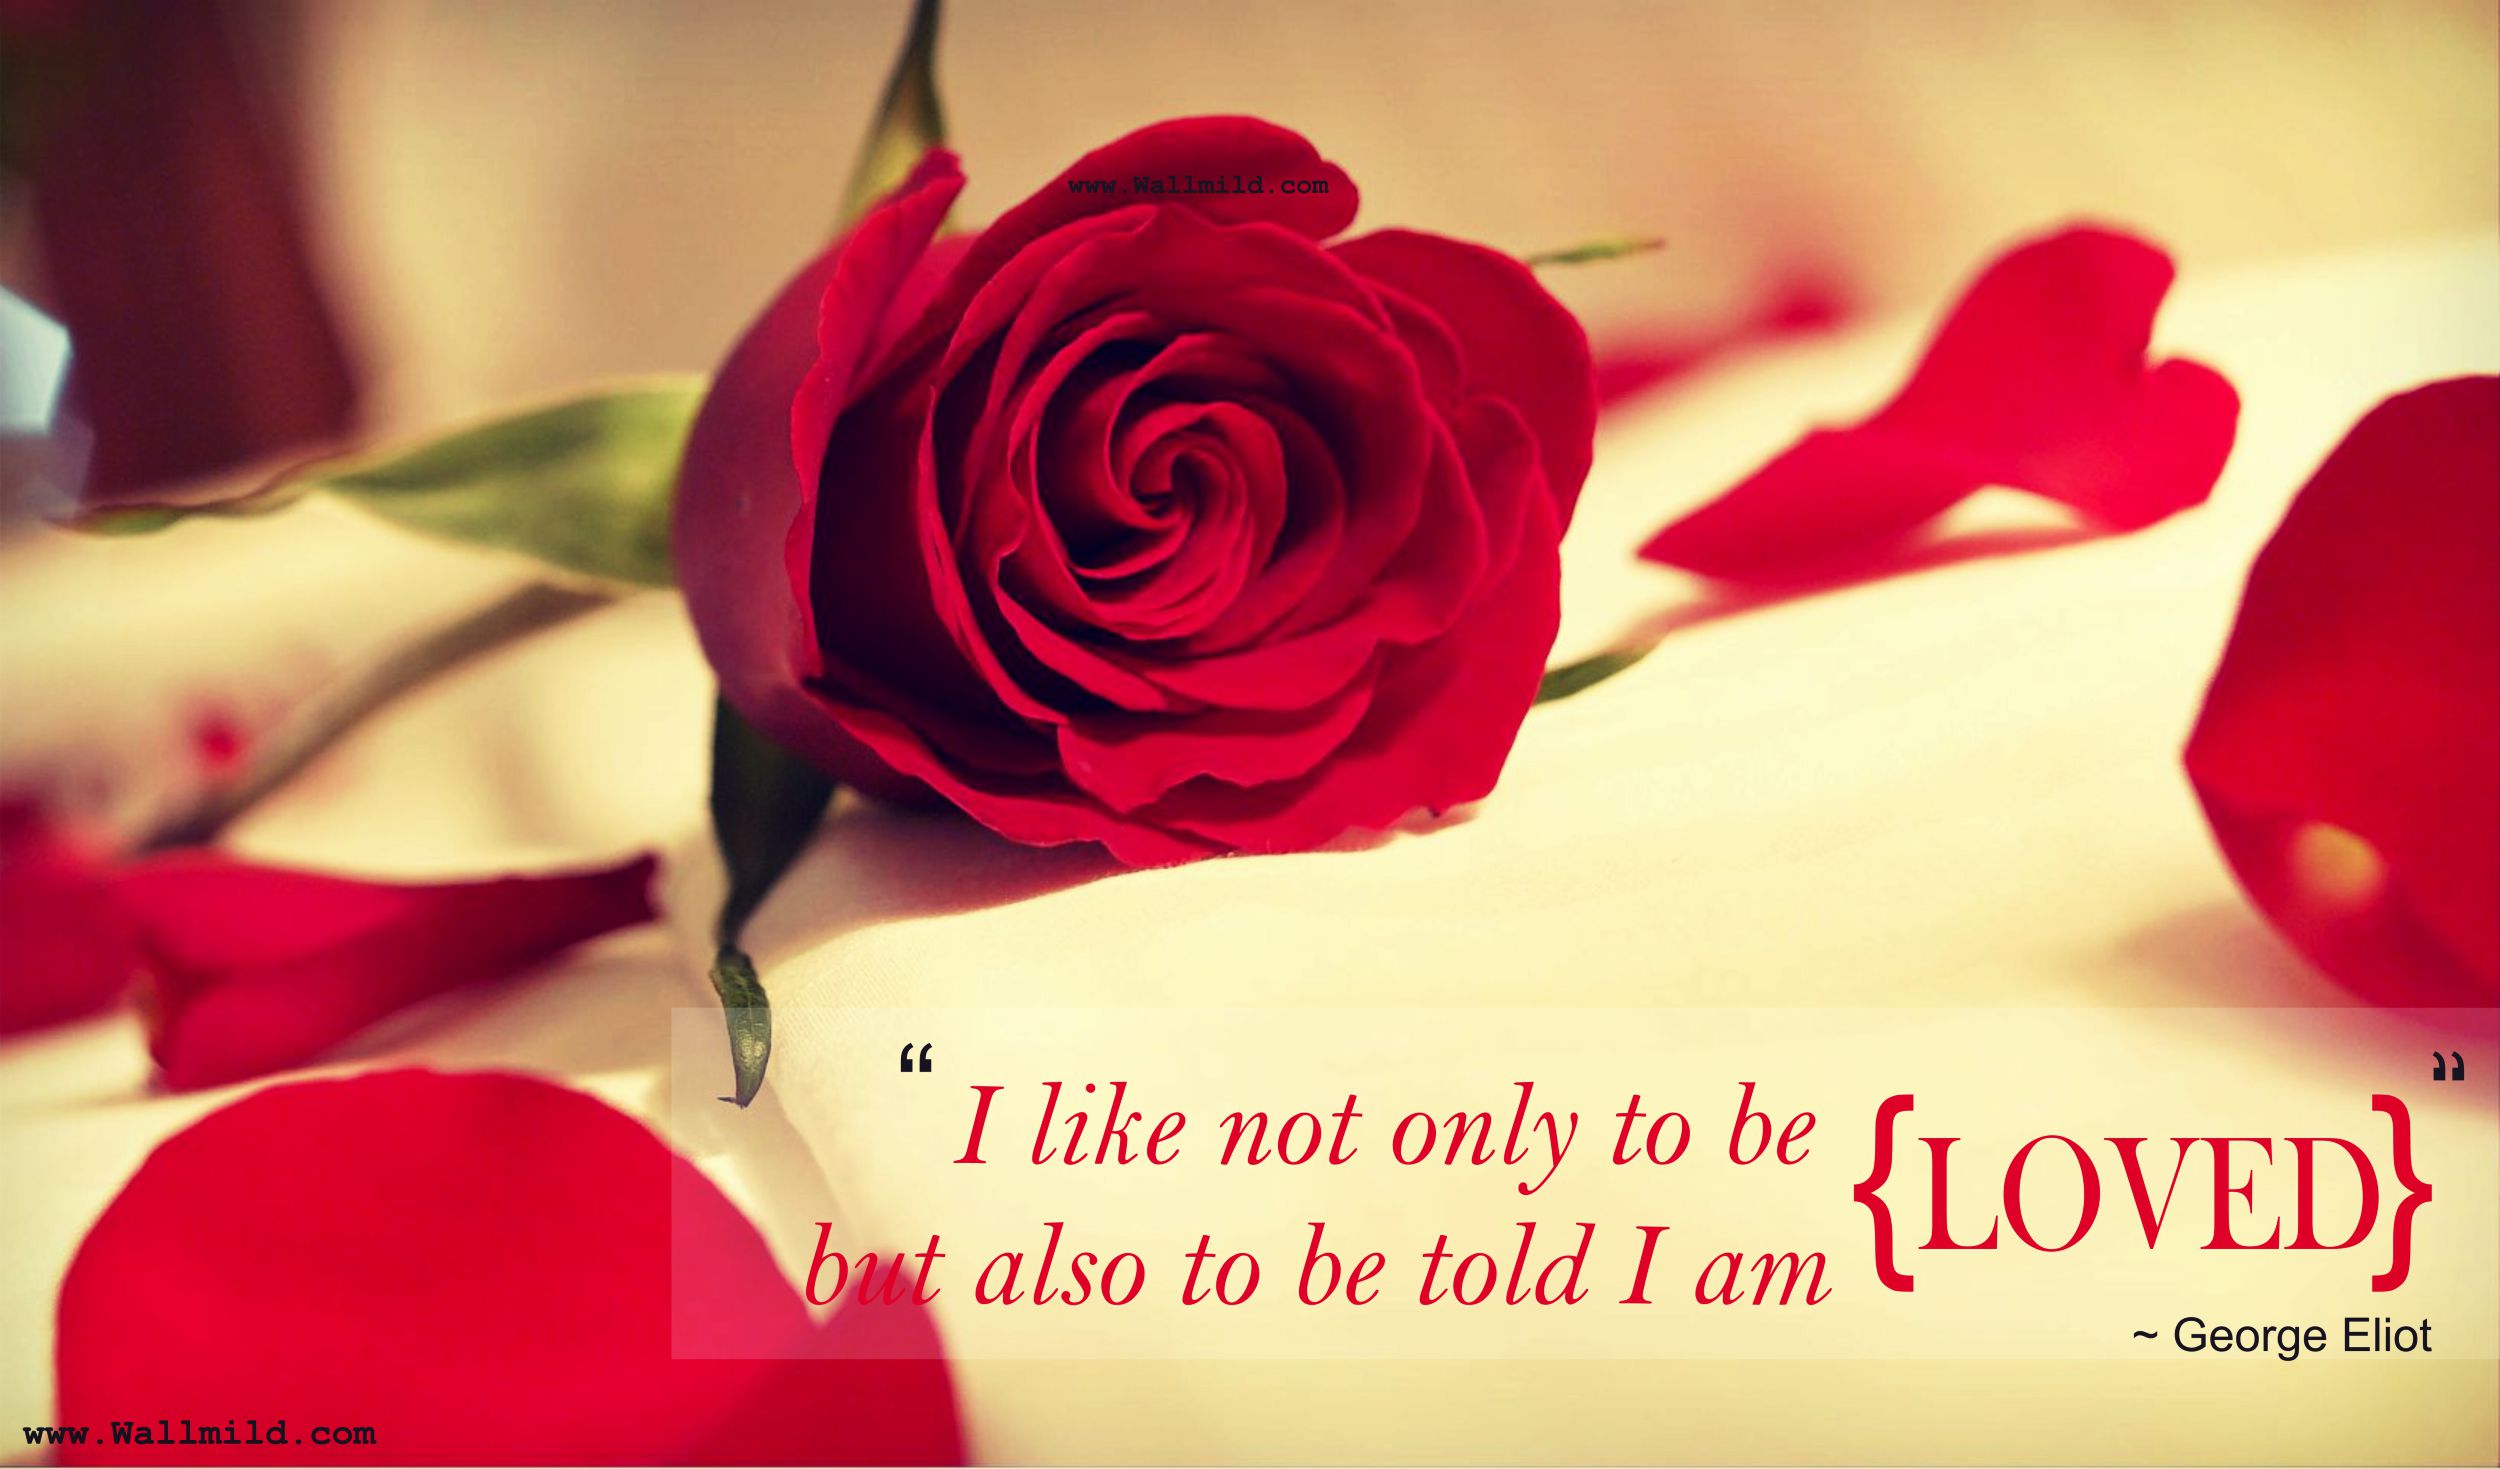 Cute Love Quotes HD Wallpaper Best Wallpapers Cute Love Quotes HD